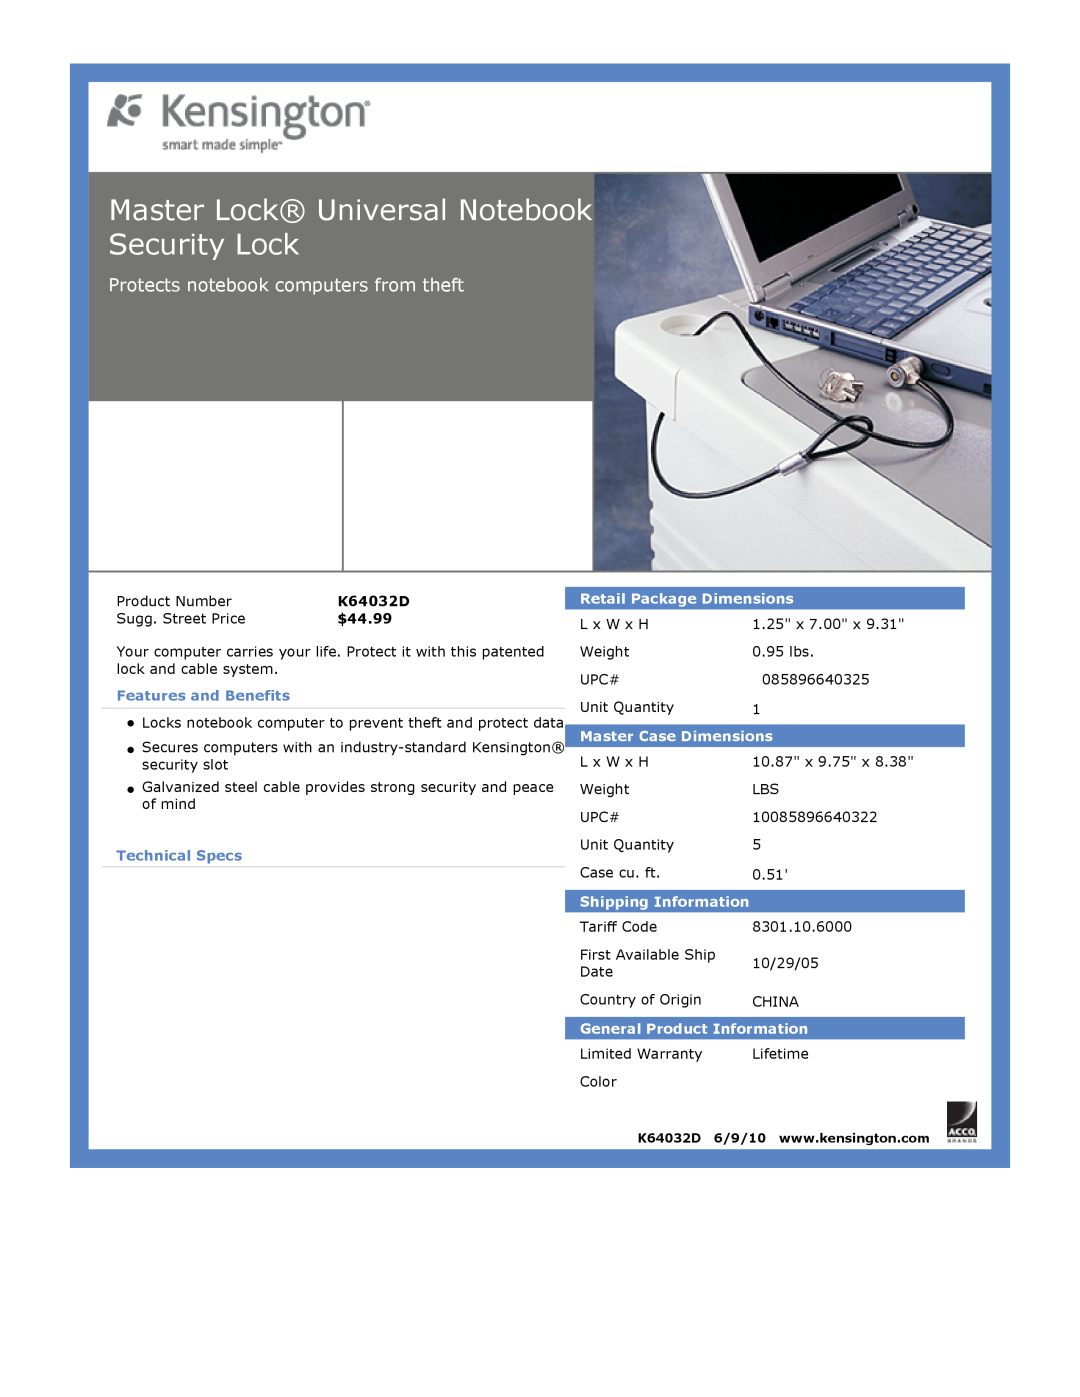 Kensington EU64325 dimensions Master Lock Universal Notebook Security Lock, Protects notebook computers from theft, $44.99 